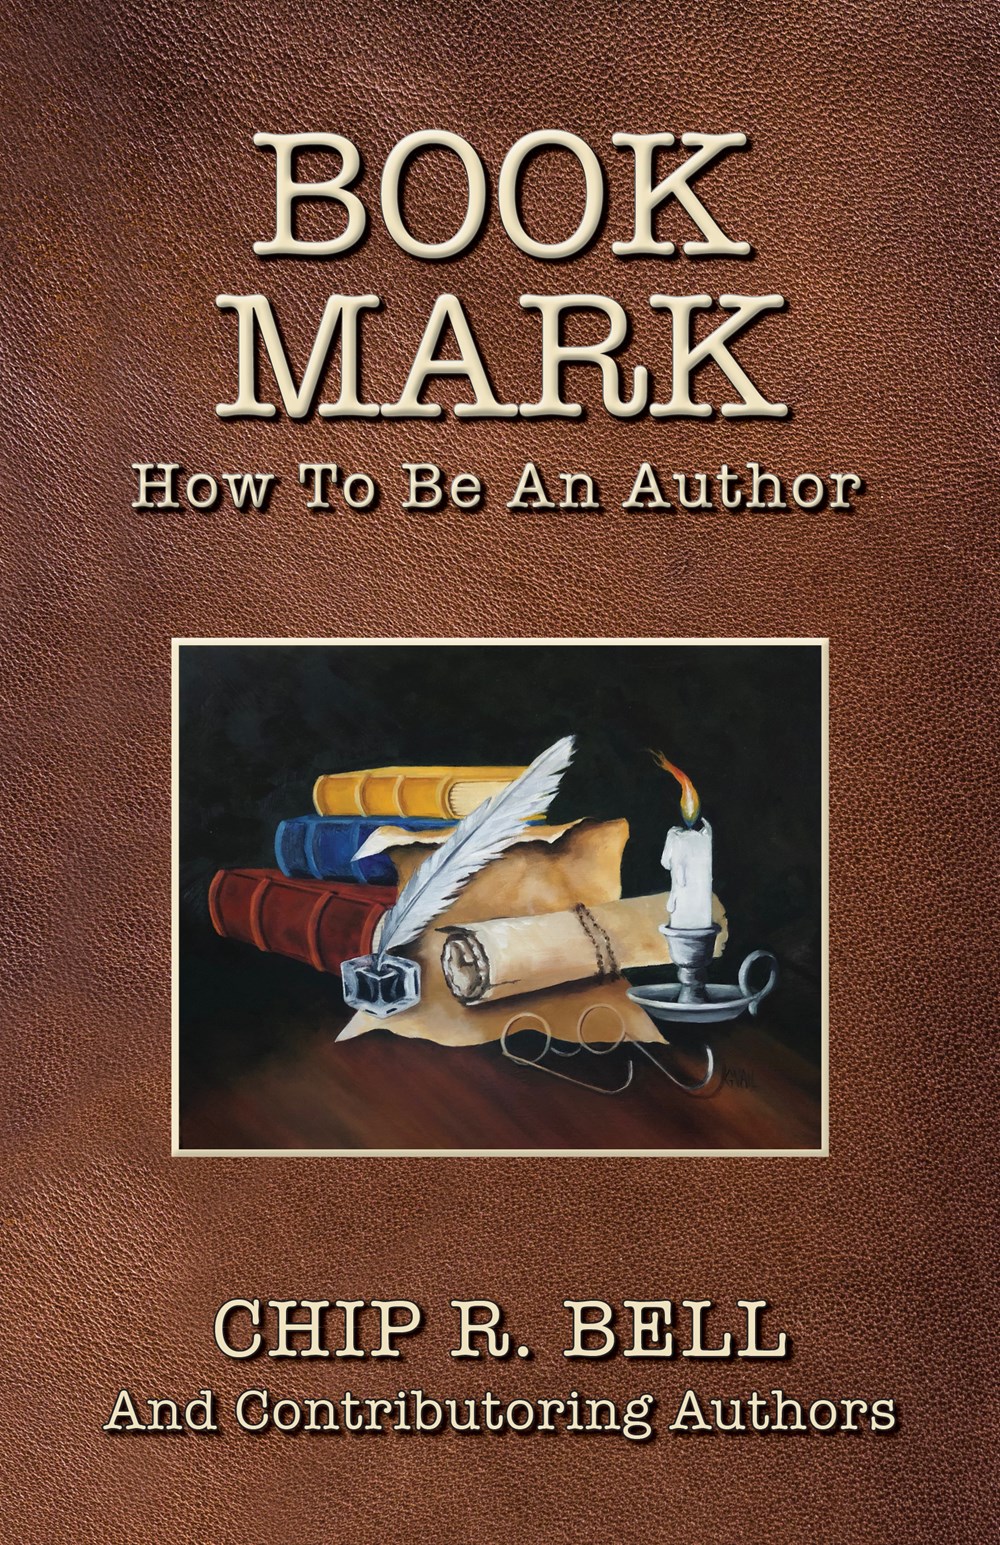 Book Mark How to Be an Author